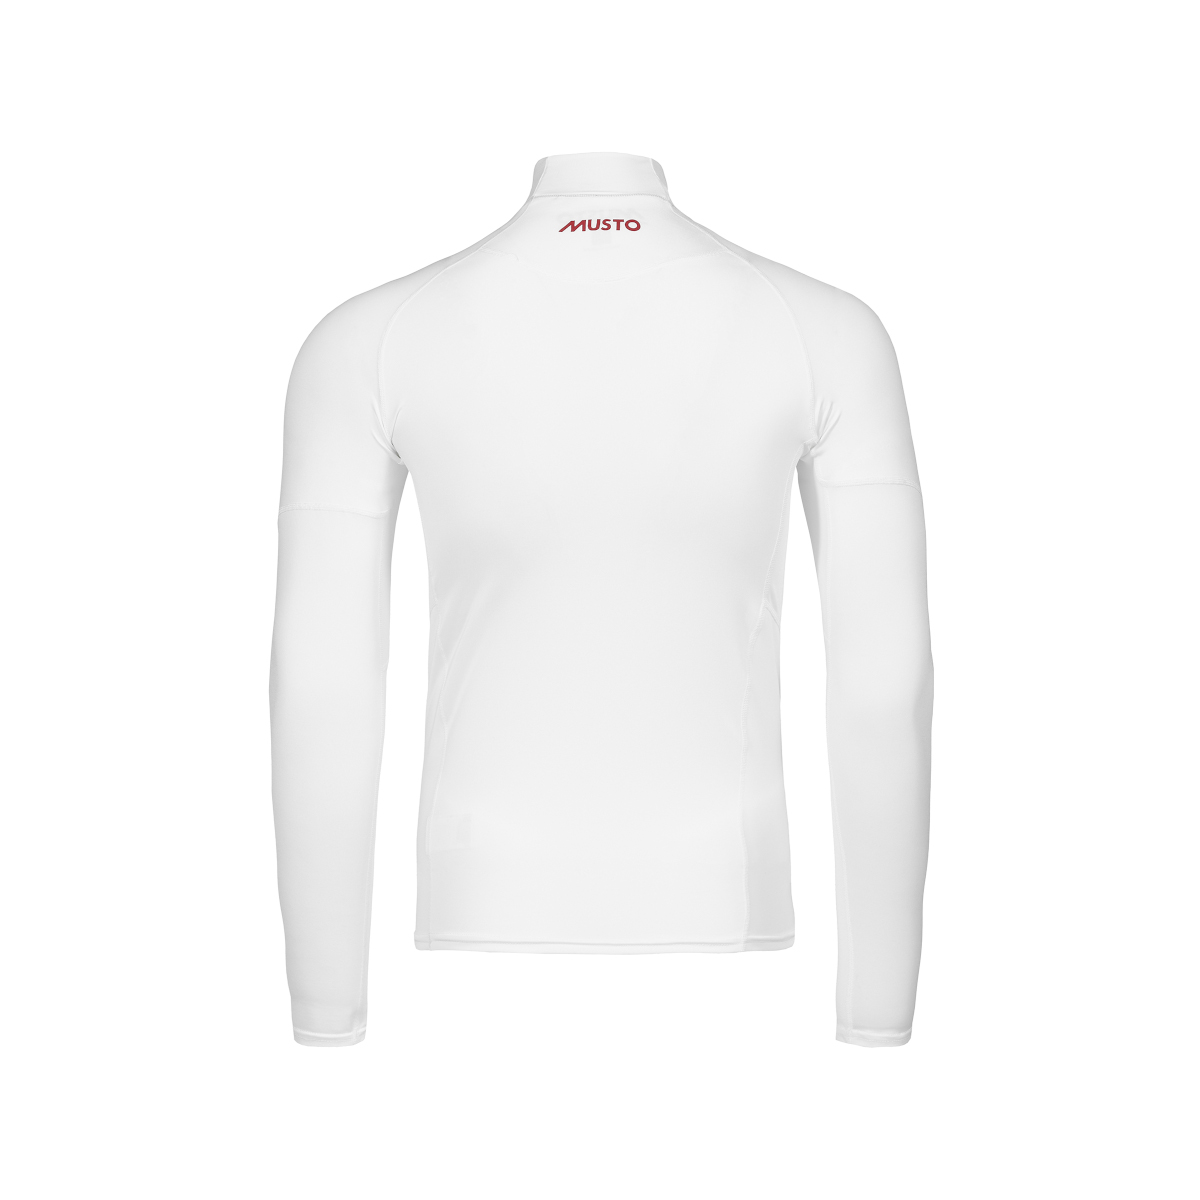 Musto Championship Rash Guard manches longues homme blanc, taille L